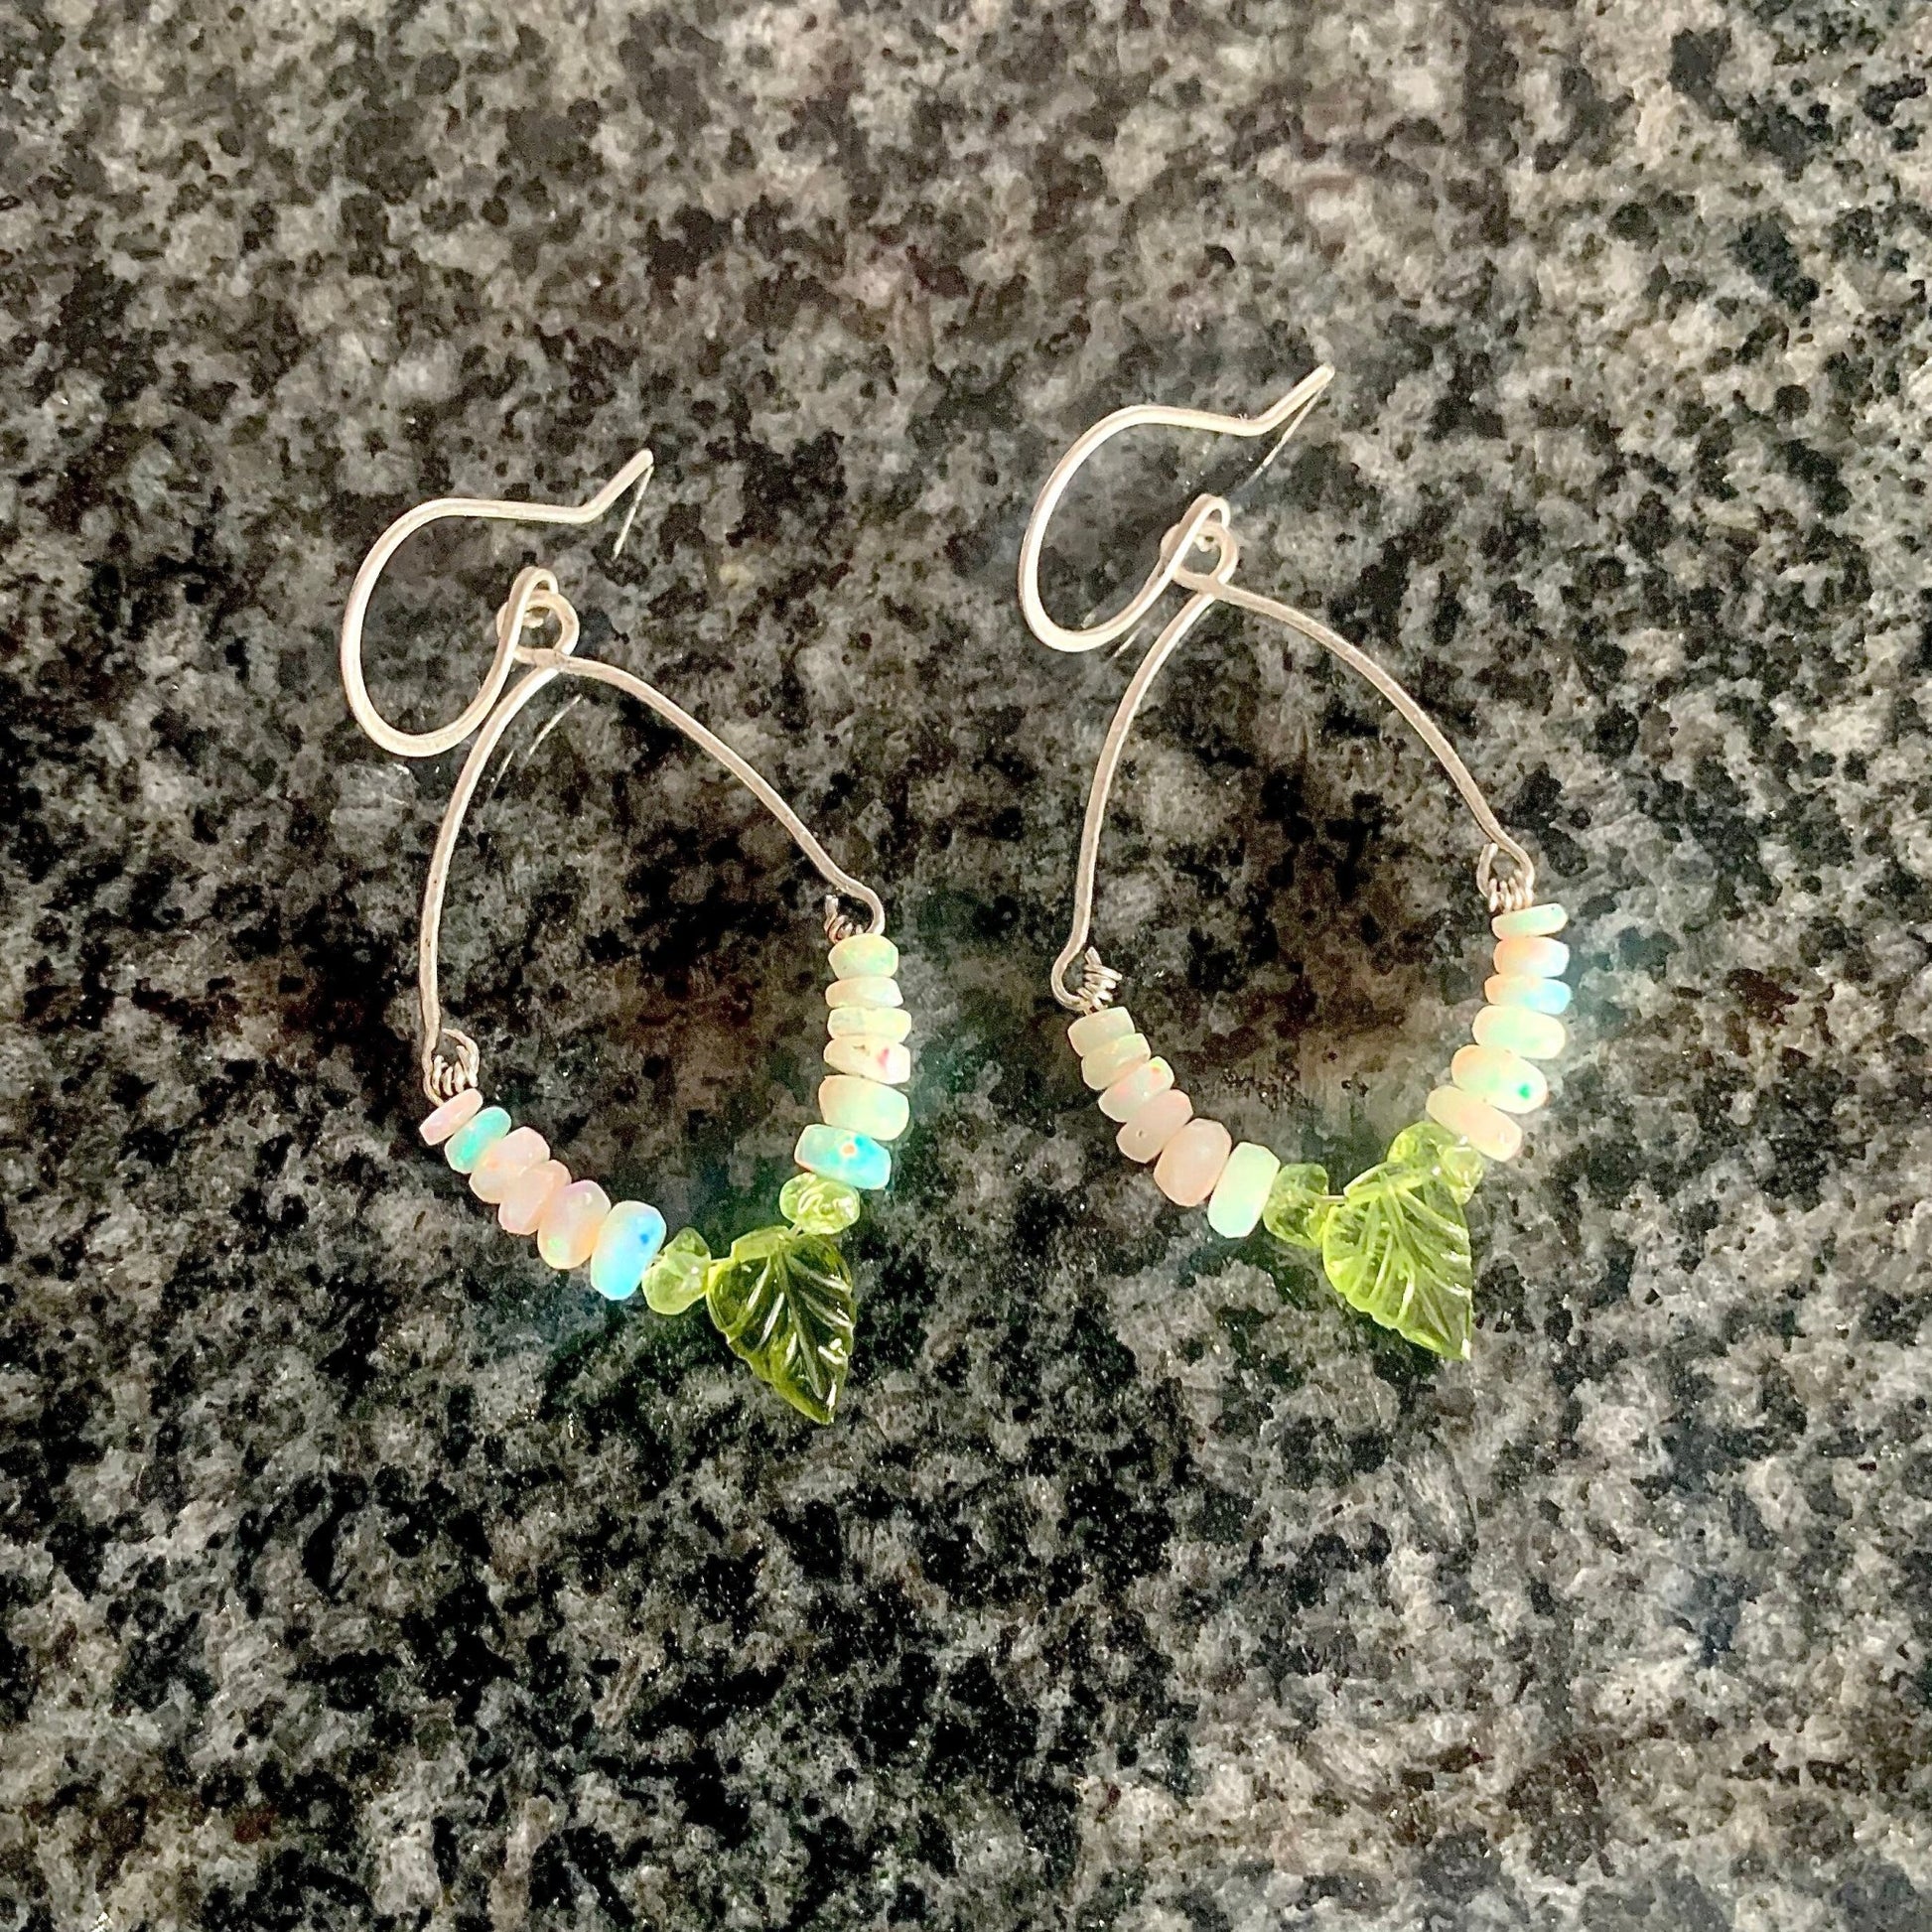 Leaves of Green Opal Earrings in Silver - Coral and Vine Co